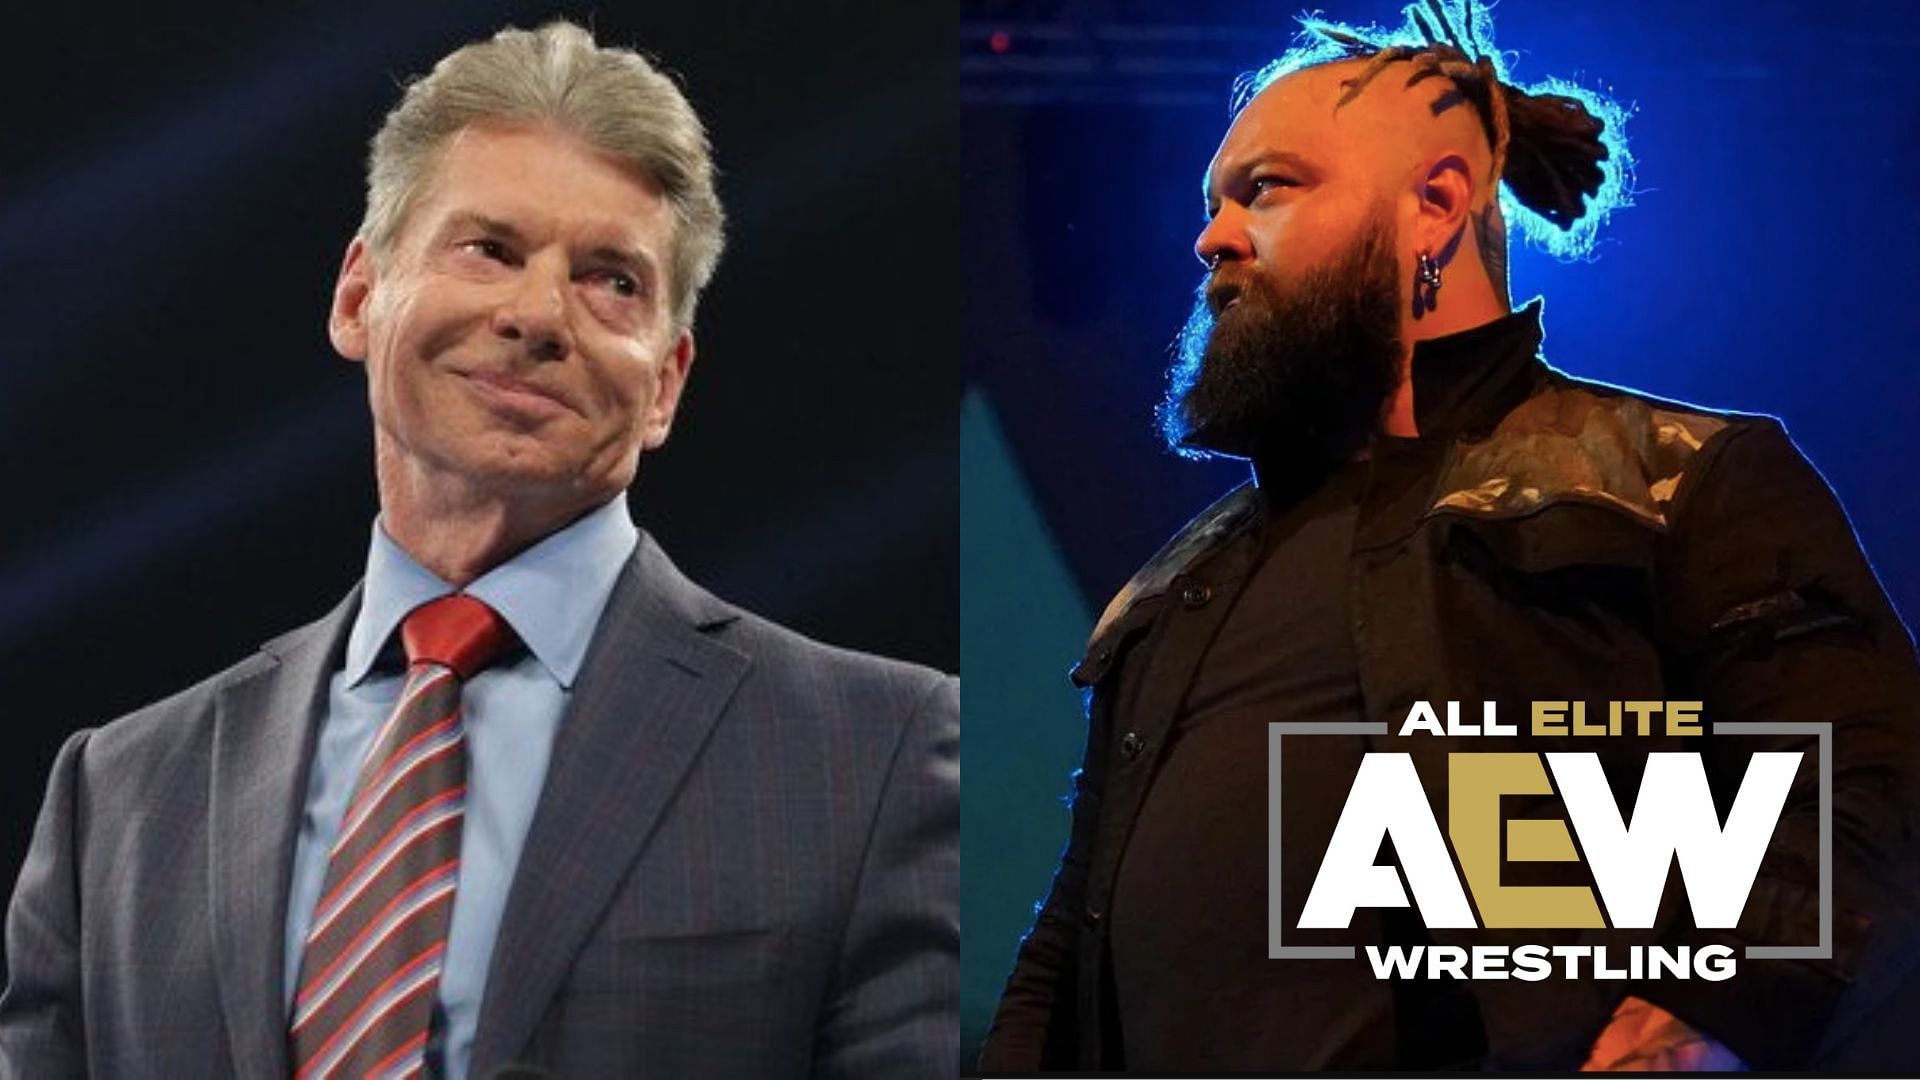 Could these WWE superstars be fearing Vince McMahon